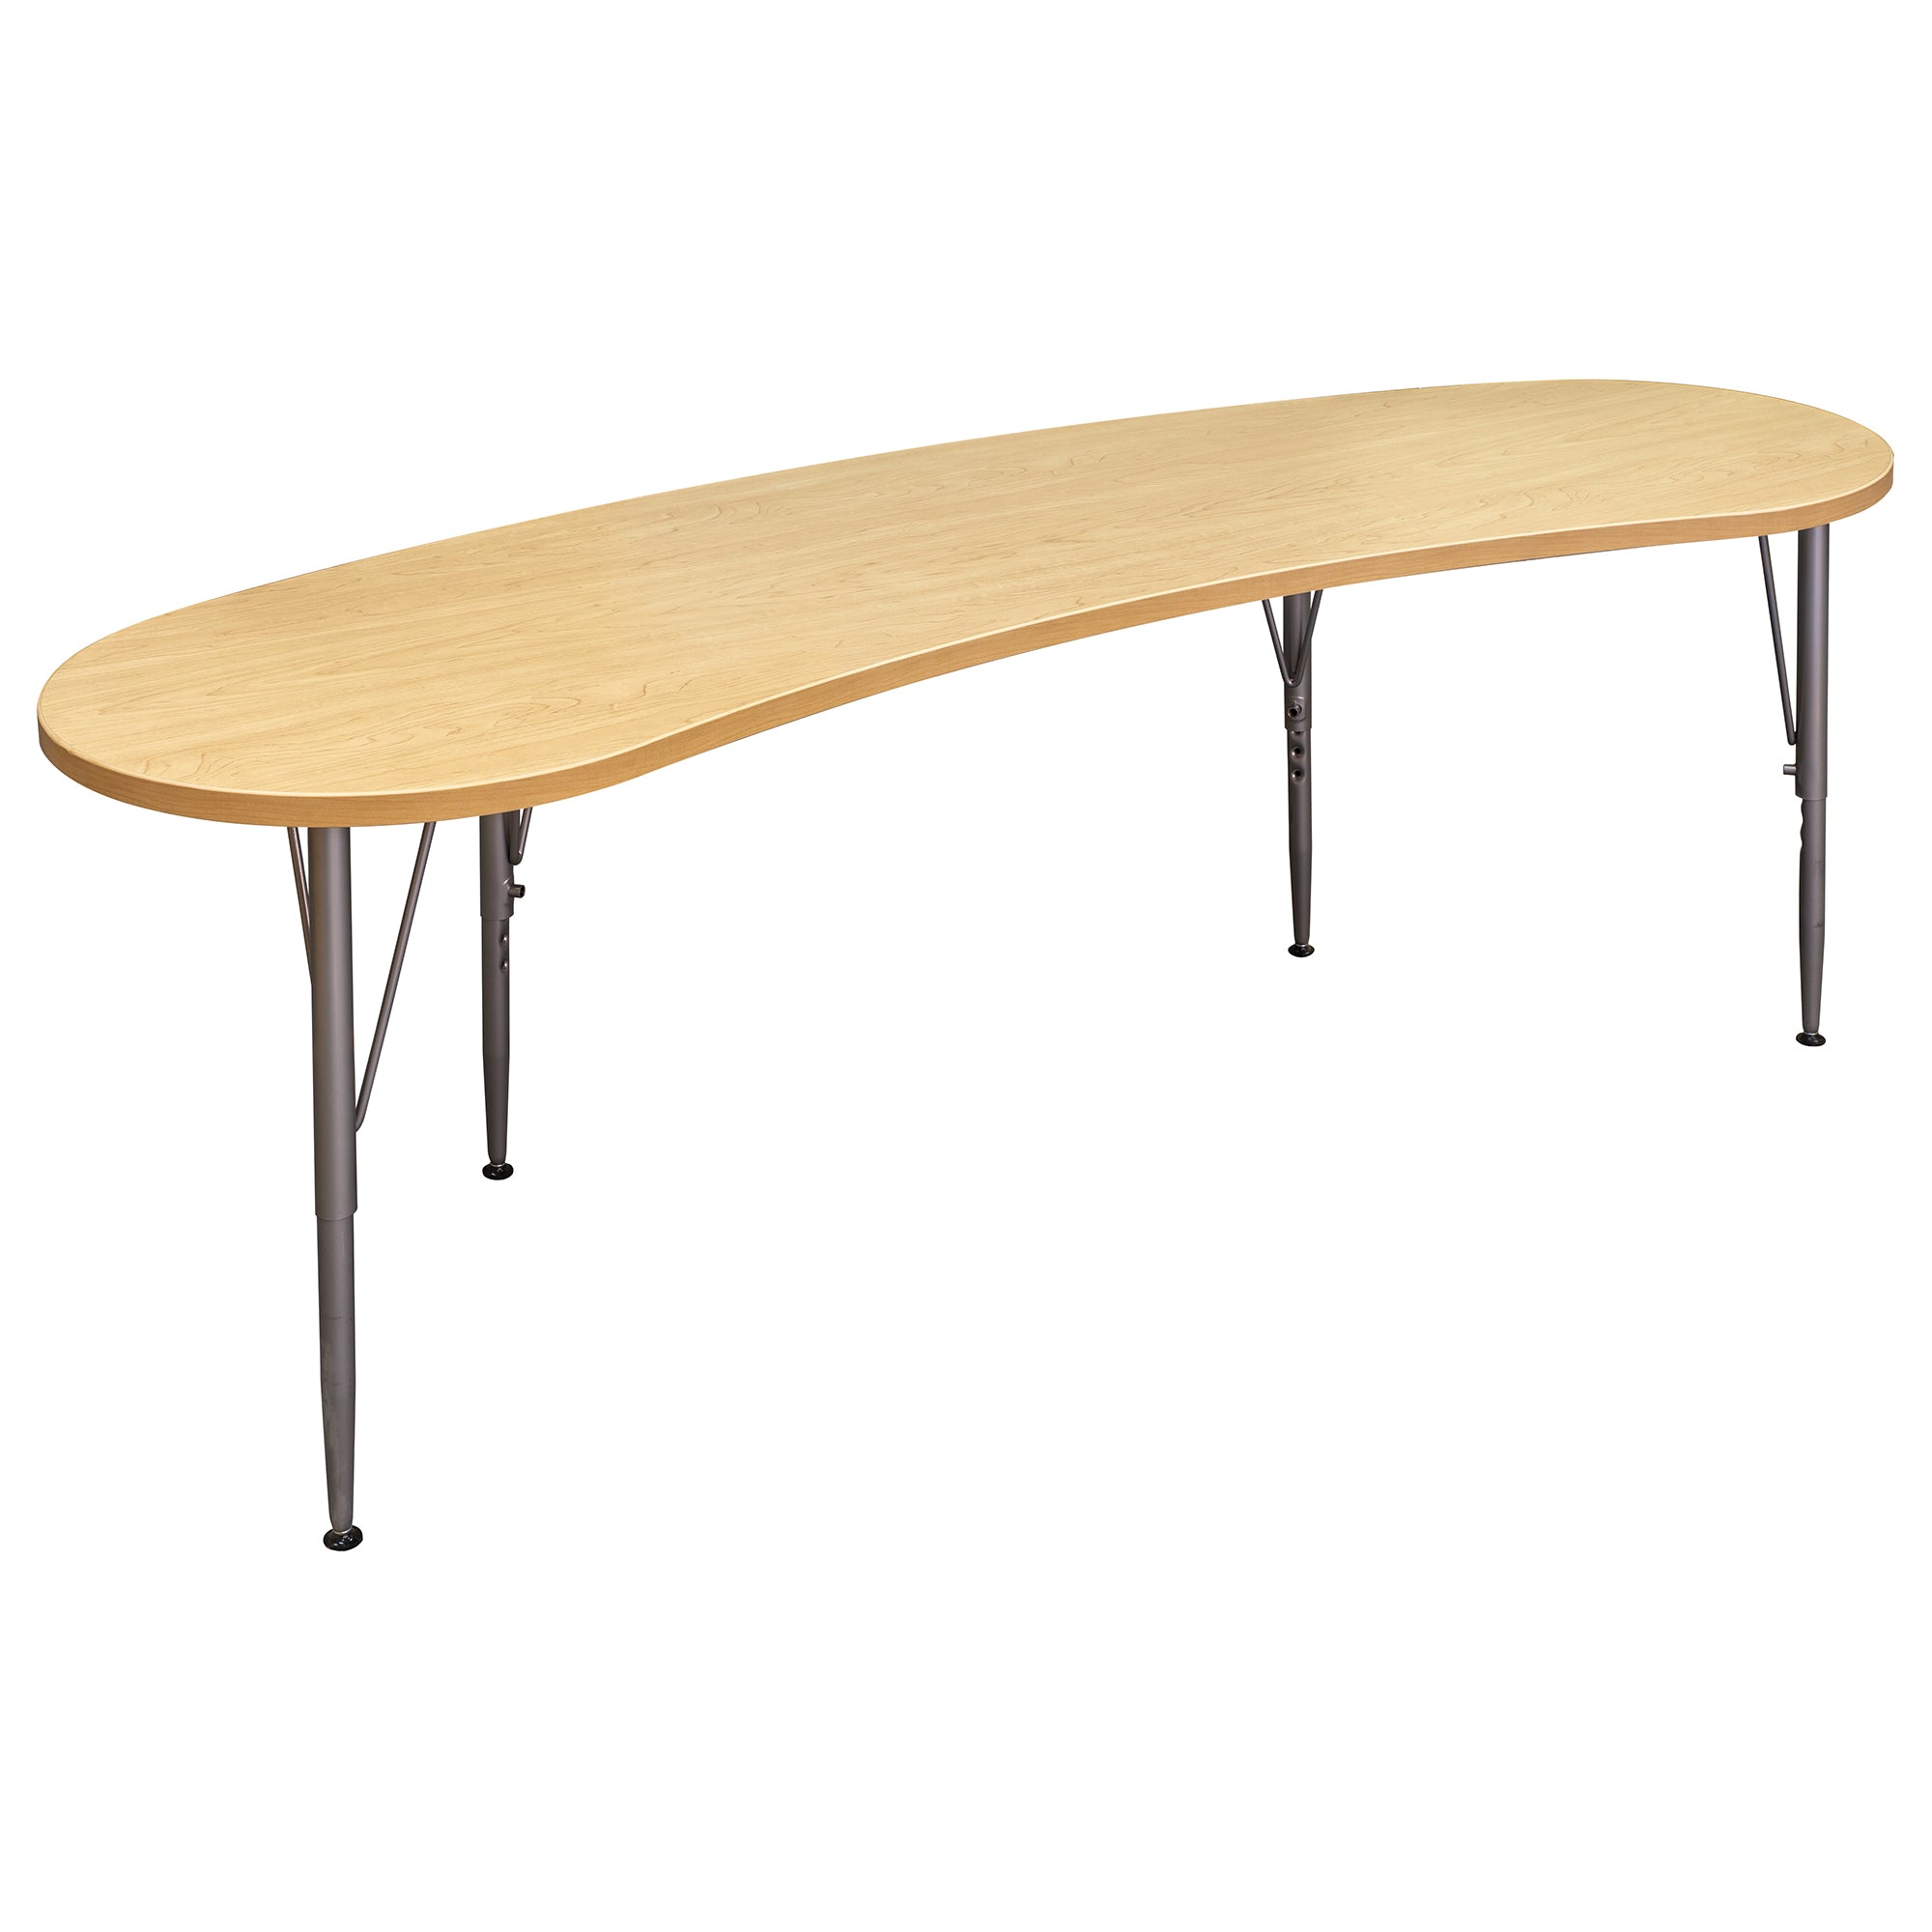 72 by 26 Curved Student Table with Adjustable Height Legs